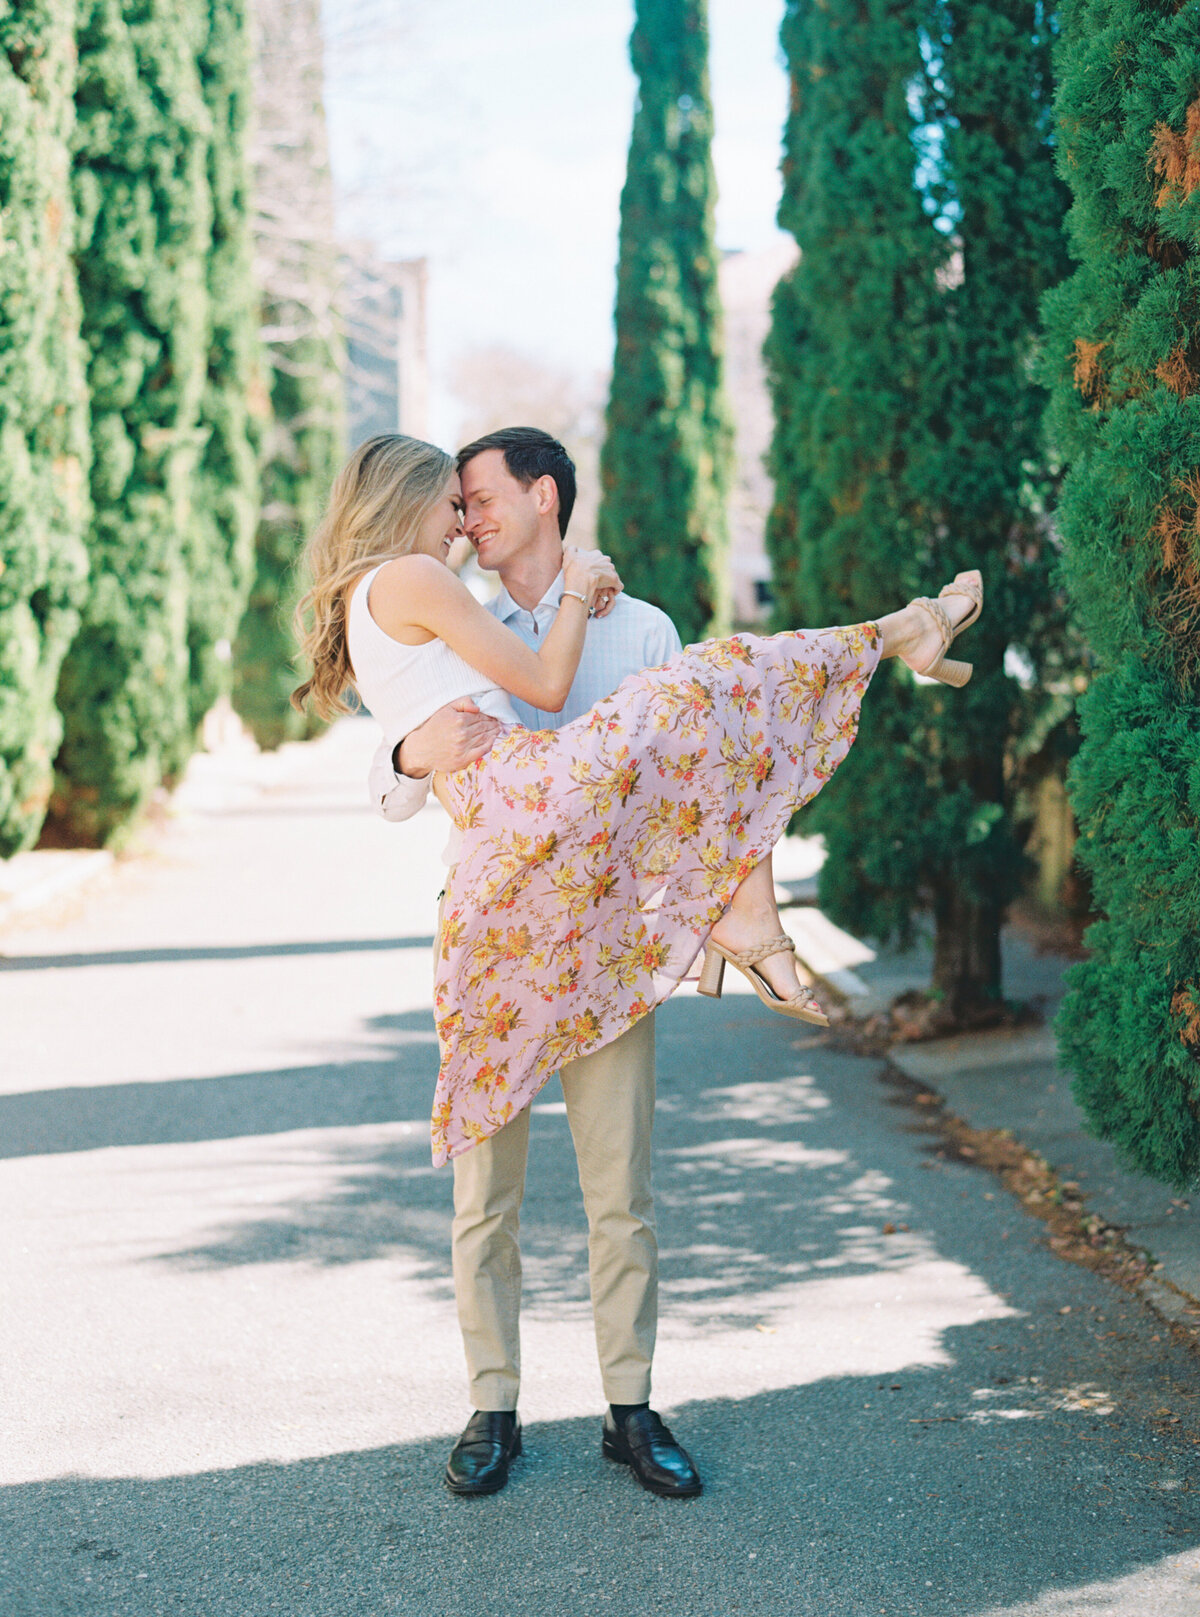 Charleston film photographer. Engagement session in early spring. Perfect classy outfits for engagement session. Pink floral skirt with pop of color design.